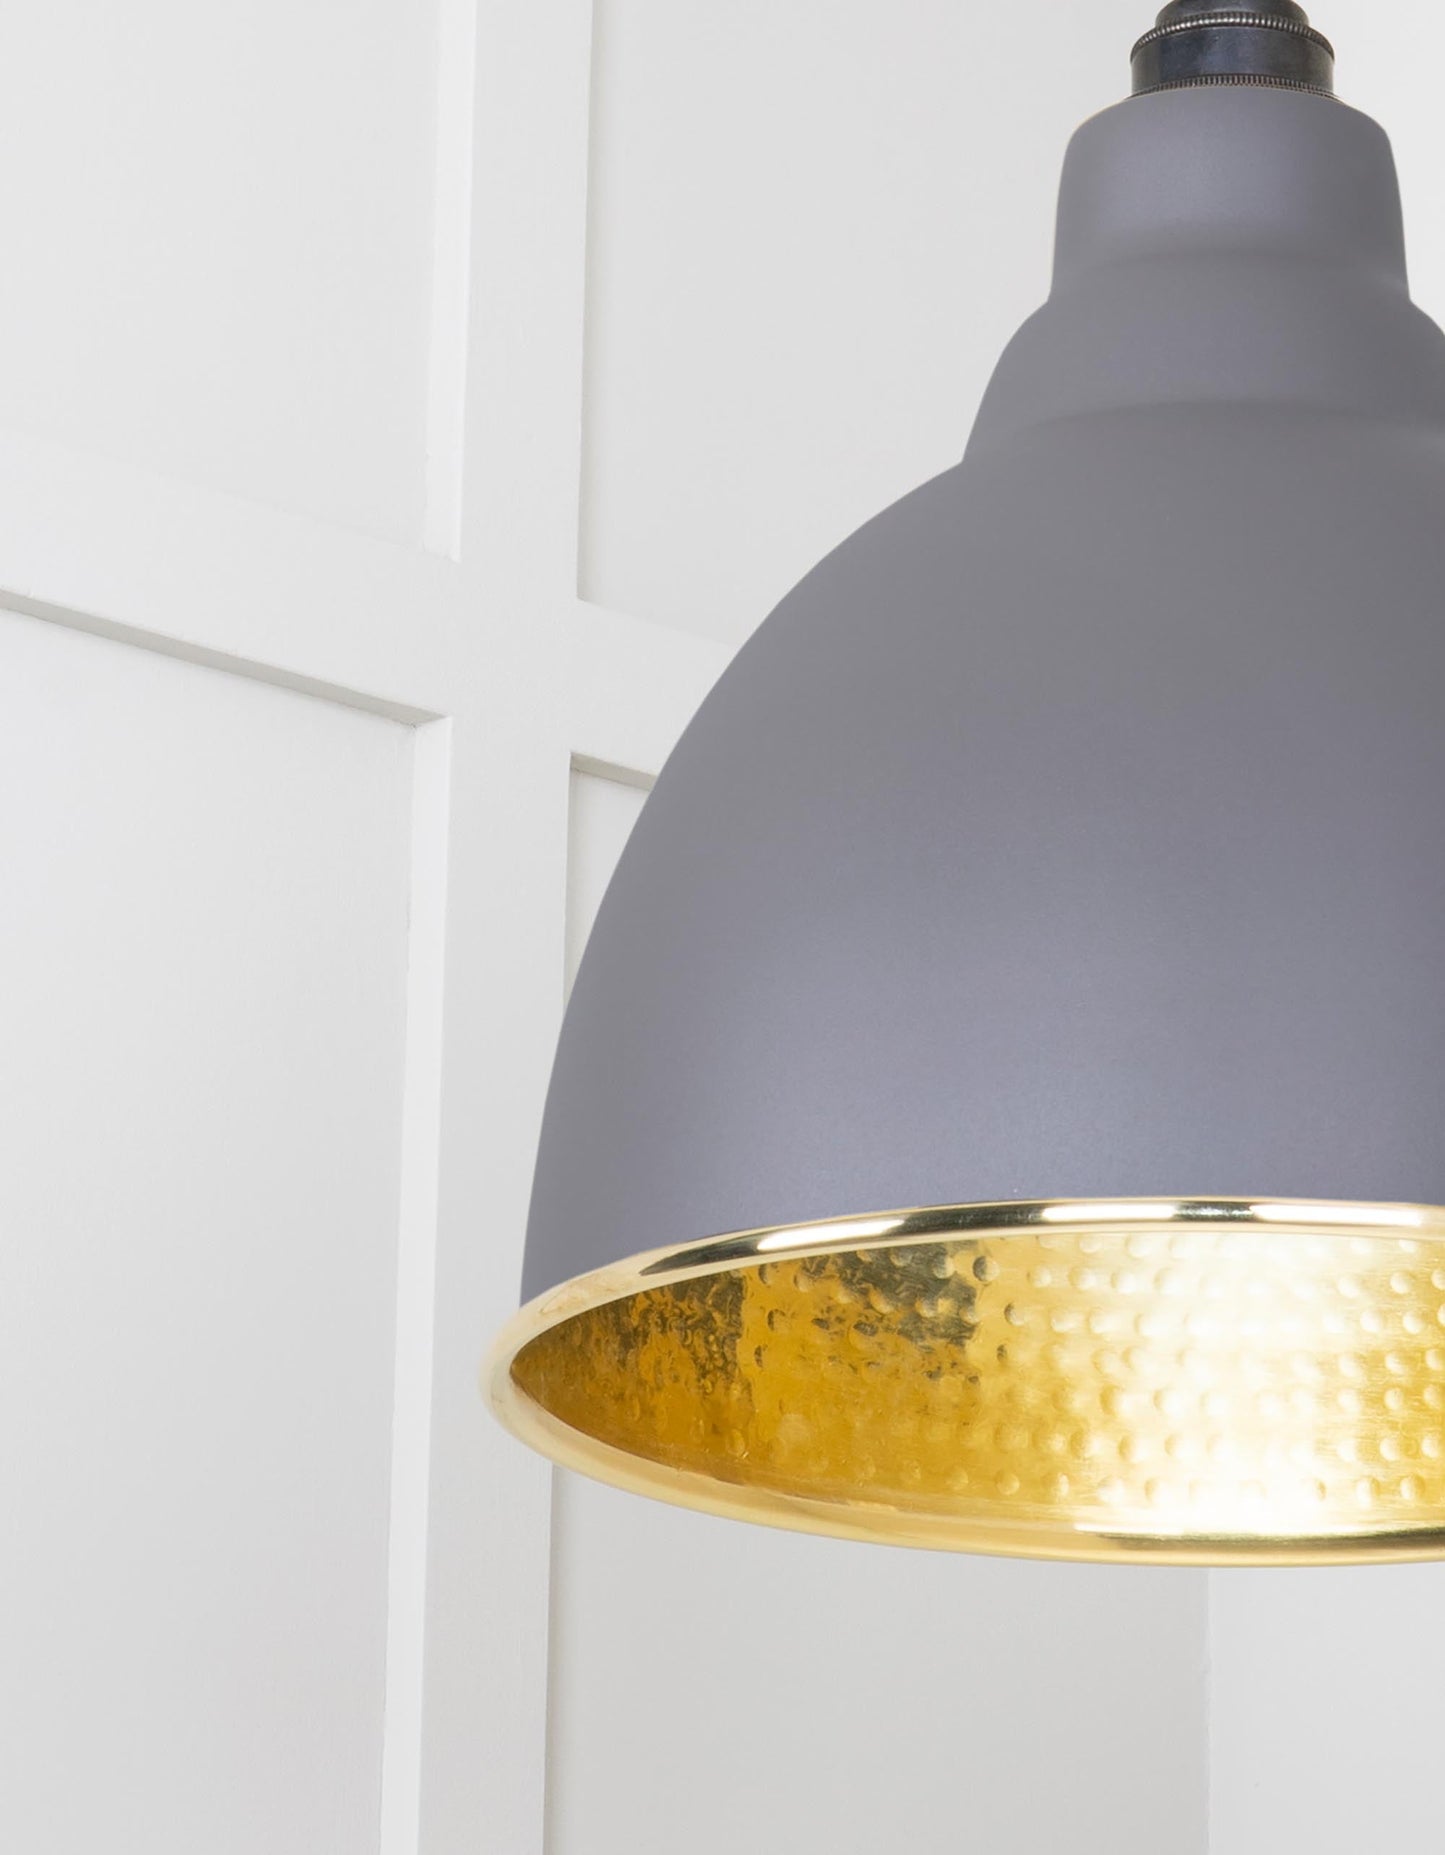 Hammered Brass Brindley Pendant Light Bluff, Detailed close up view of pendant.